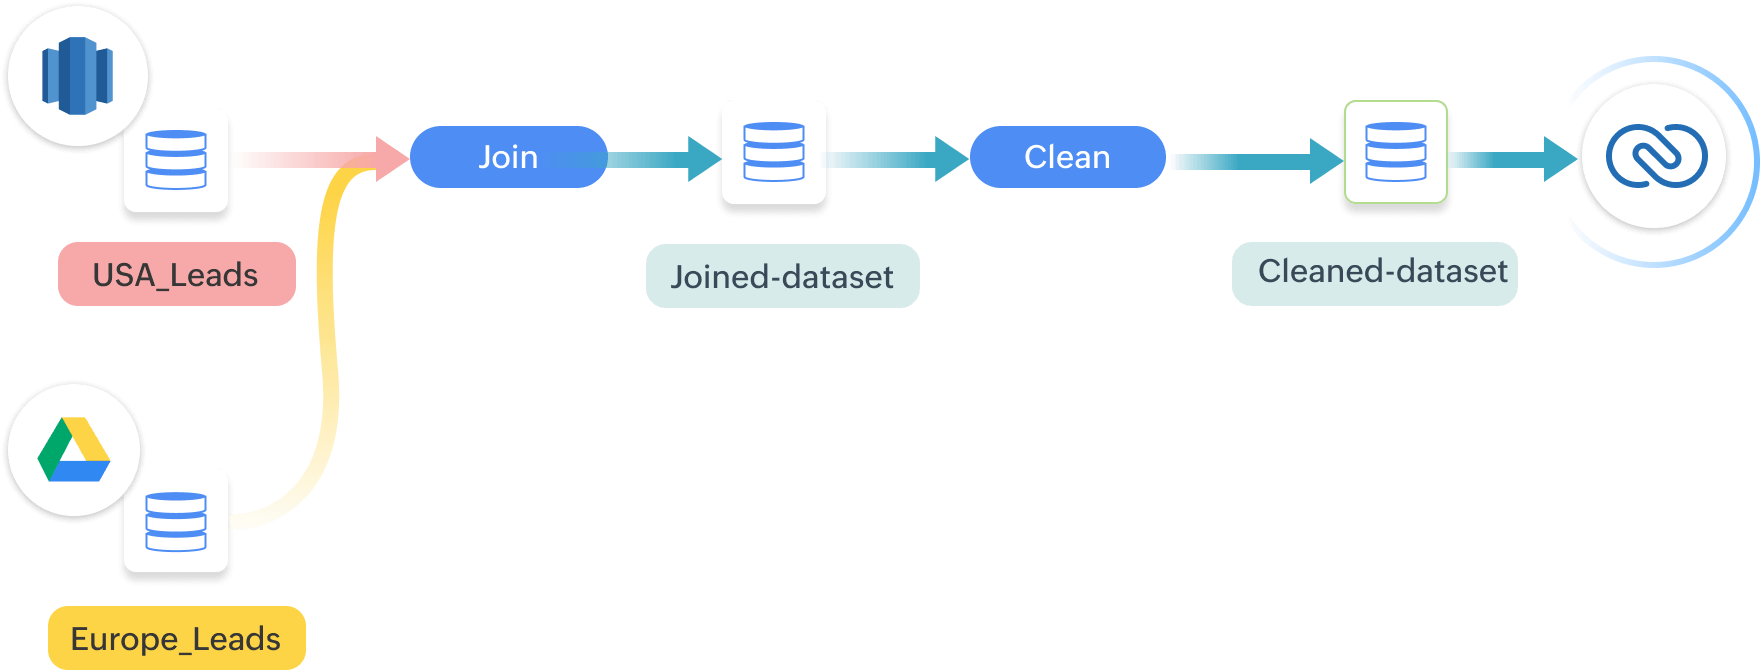 Automated Data Pipeline